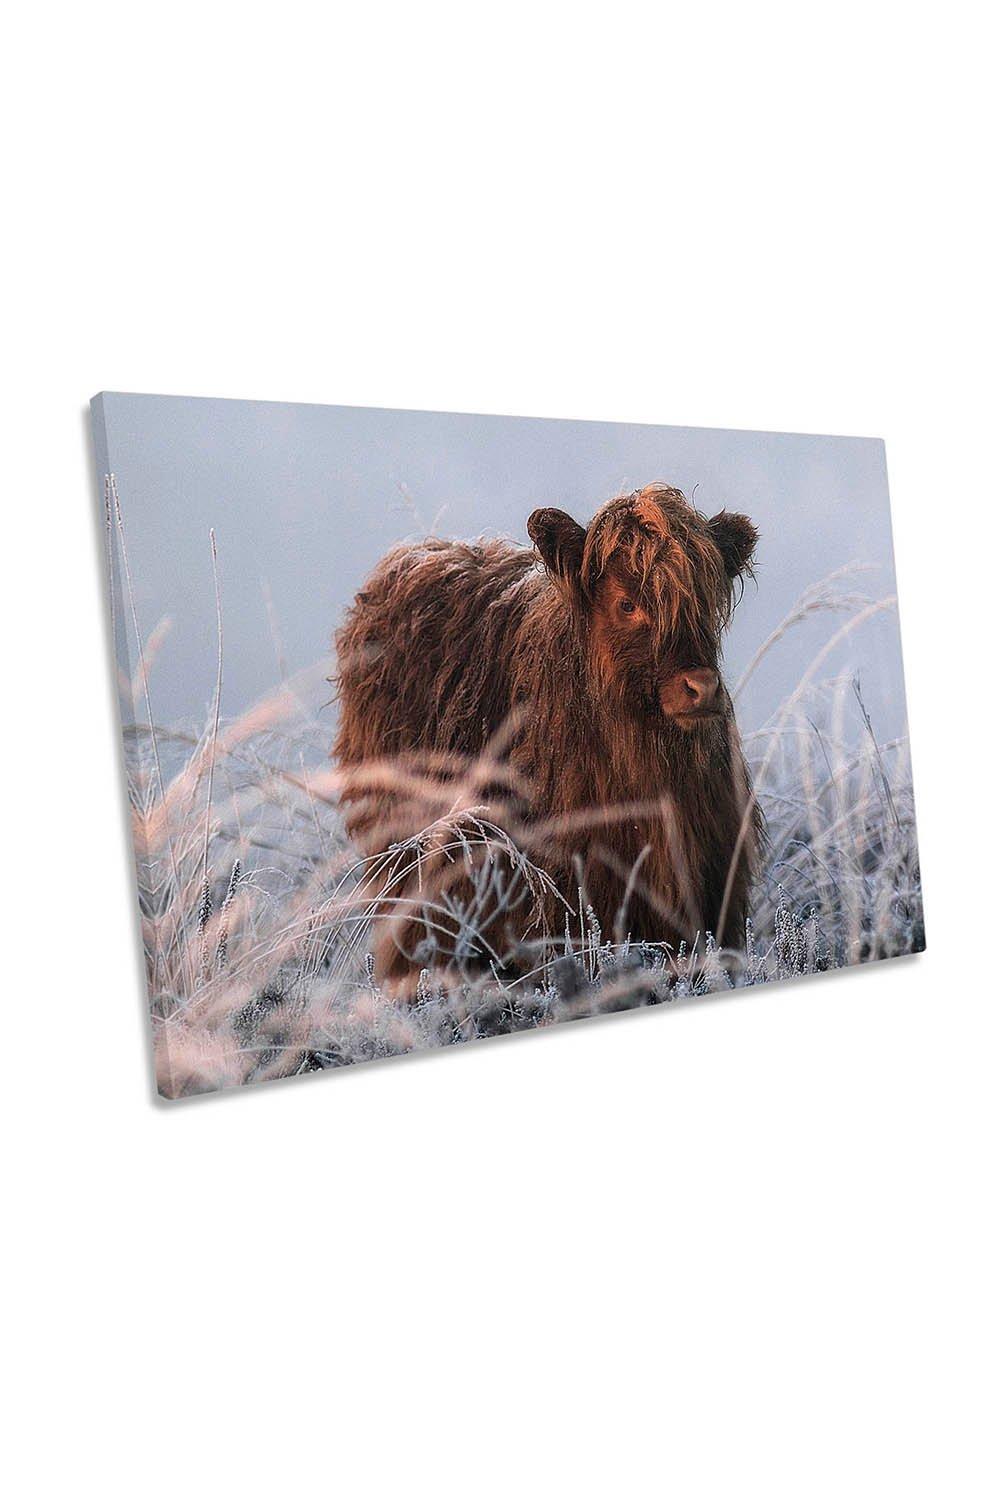 Baby Scottish Highland Cow Canvas Wall Art Picture Print